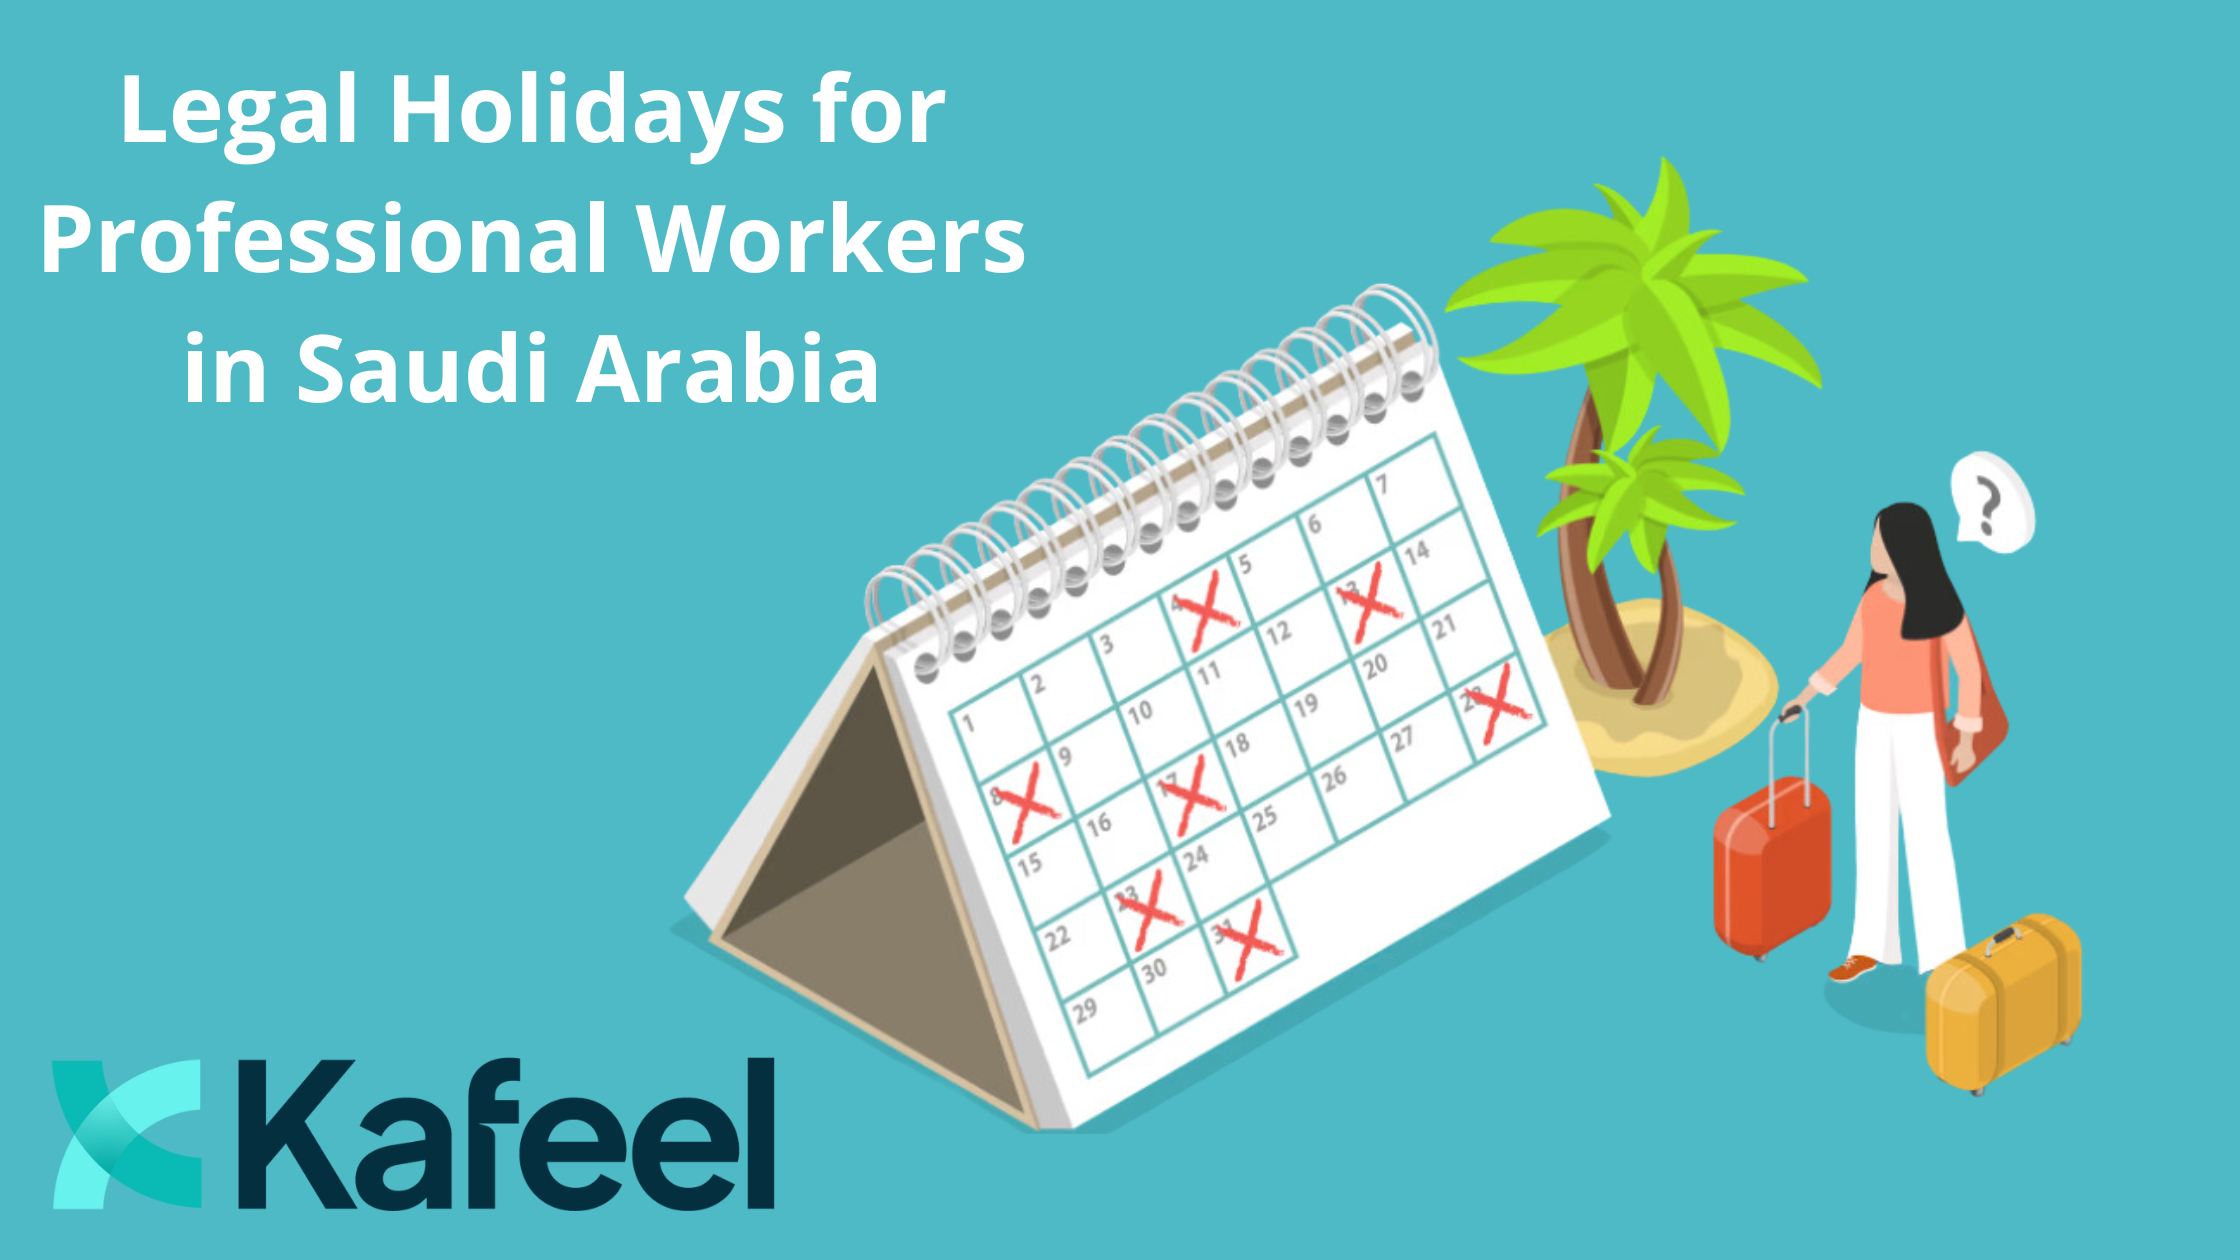 Holidays For Non-Saudi Professional Workers